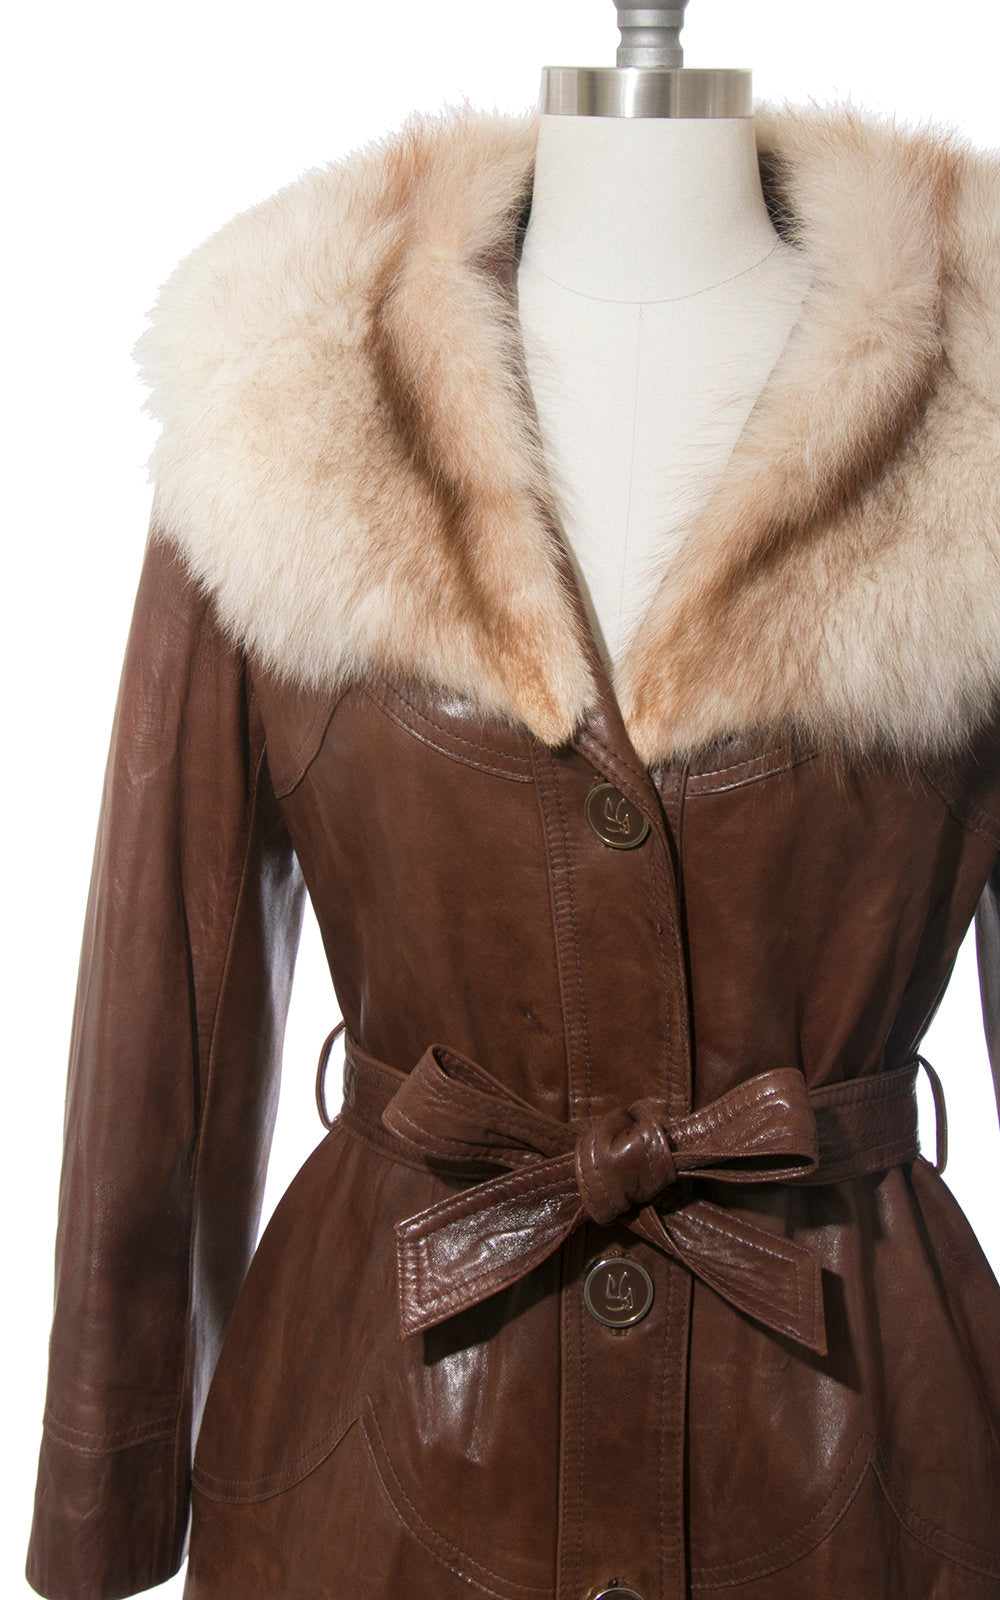 Vintage 1970s Coat | 70s Fox Fur Collar Buttery Brown Leather Belted Princess Coat (medium)